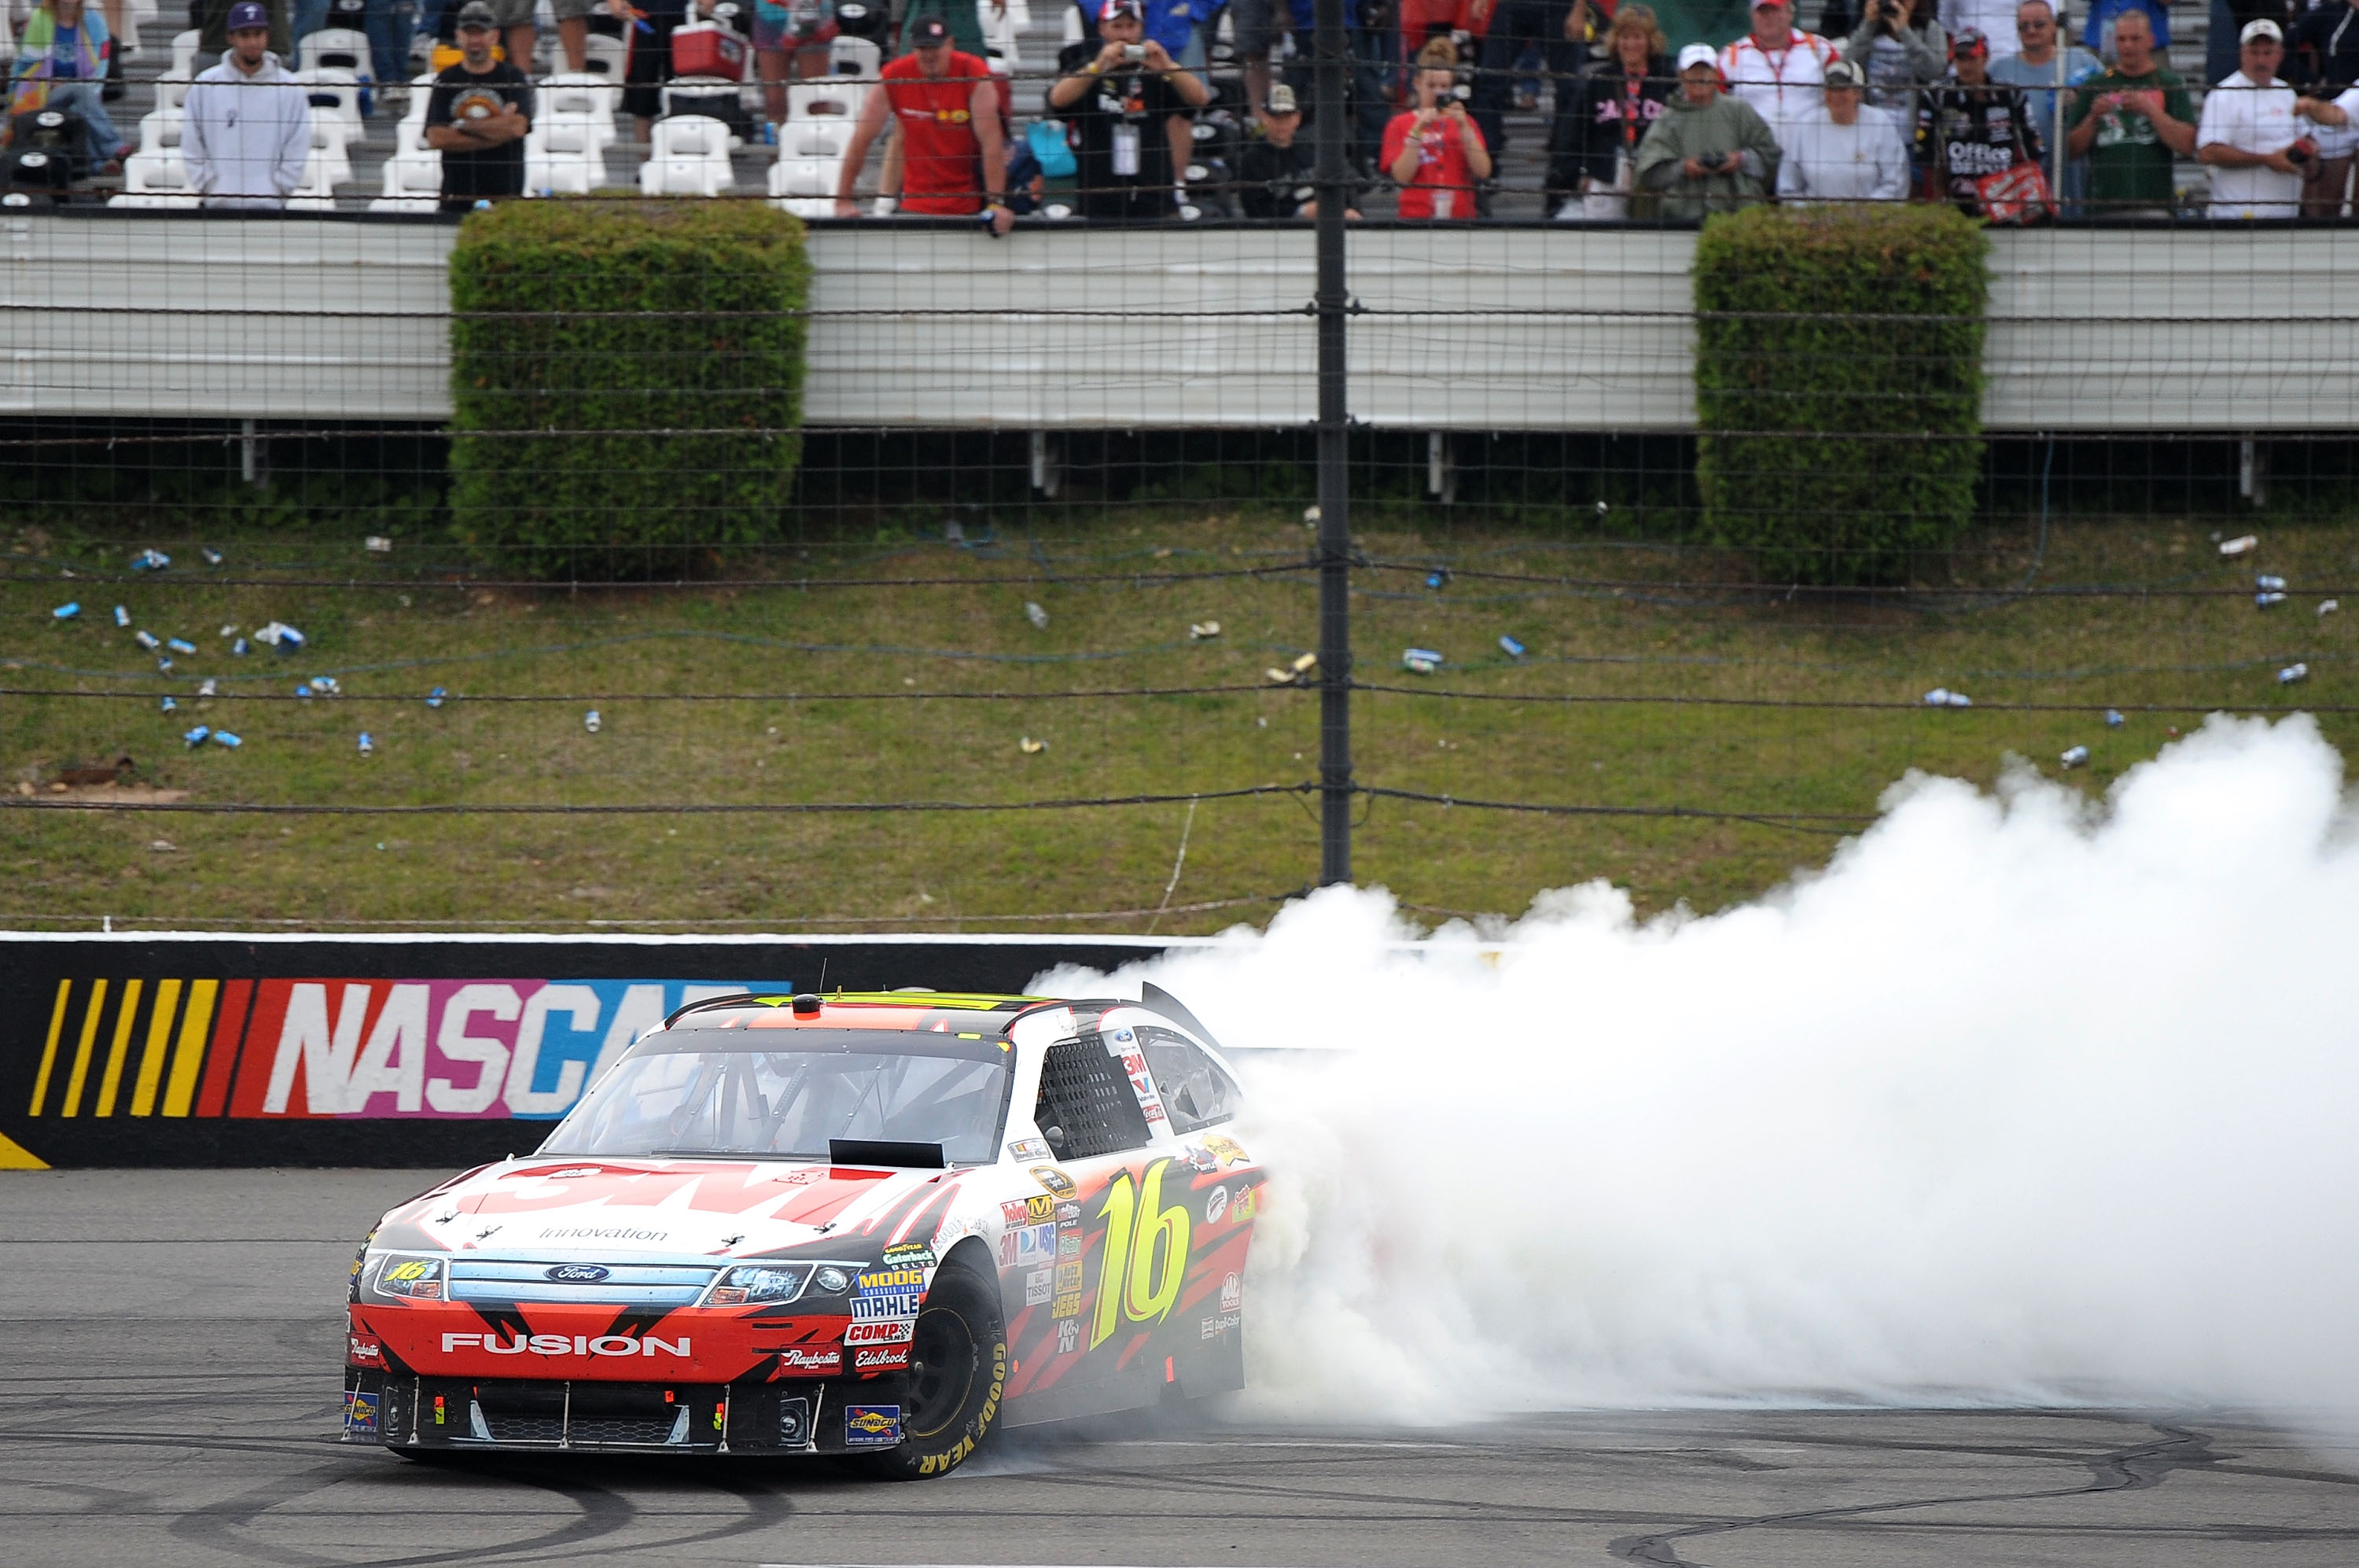 LONG POND, PA - AUGUST 01:  Greg Biffle, driver of the #16 3M Ford, performs a burnout after winning the NASCAR Sprint Cup Series Sunoco Red Cross Pennsylvania 500 at Pocono Raceway on August 1, 2010 in Long Pond, Pennsylvania.  (Photo by Drew Hallowell/G